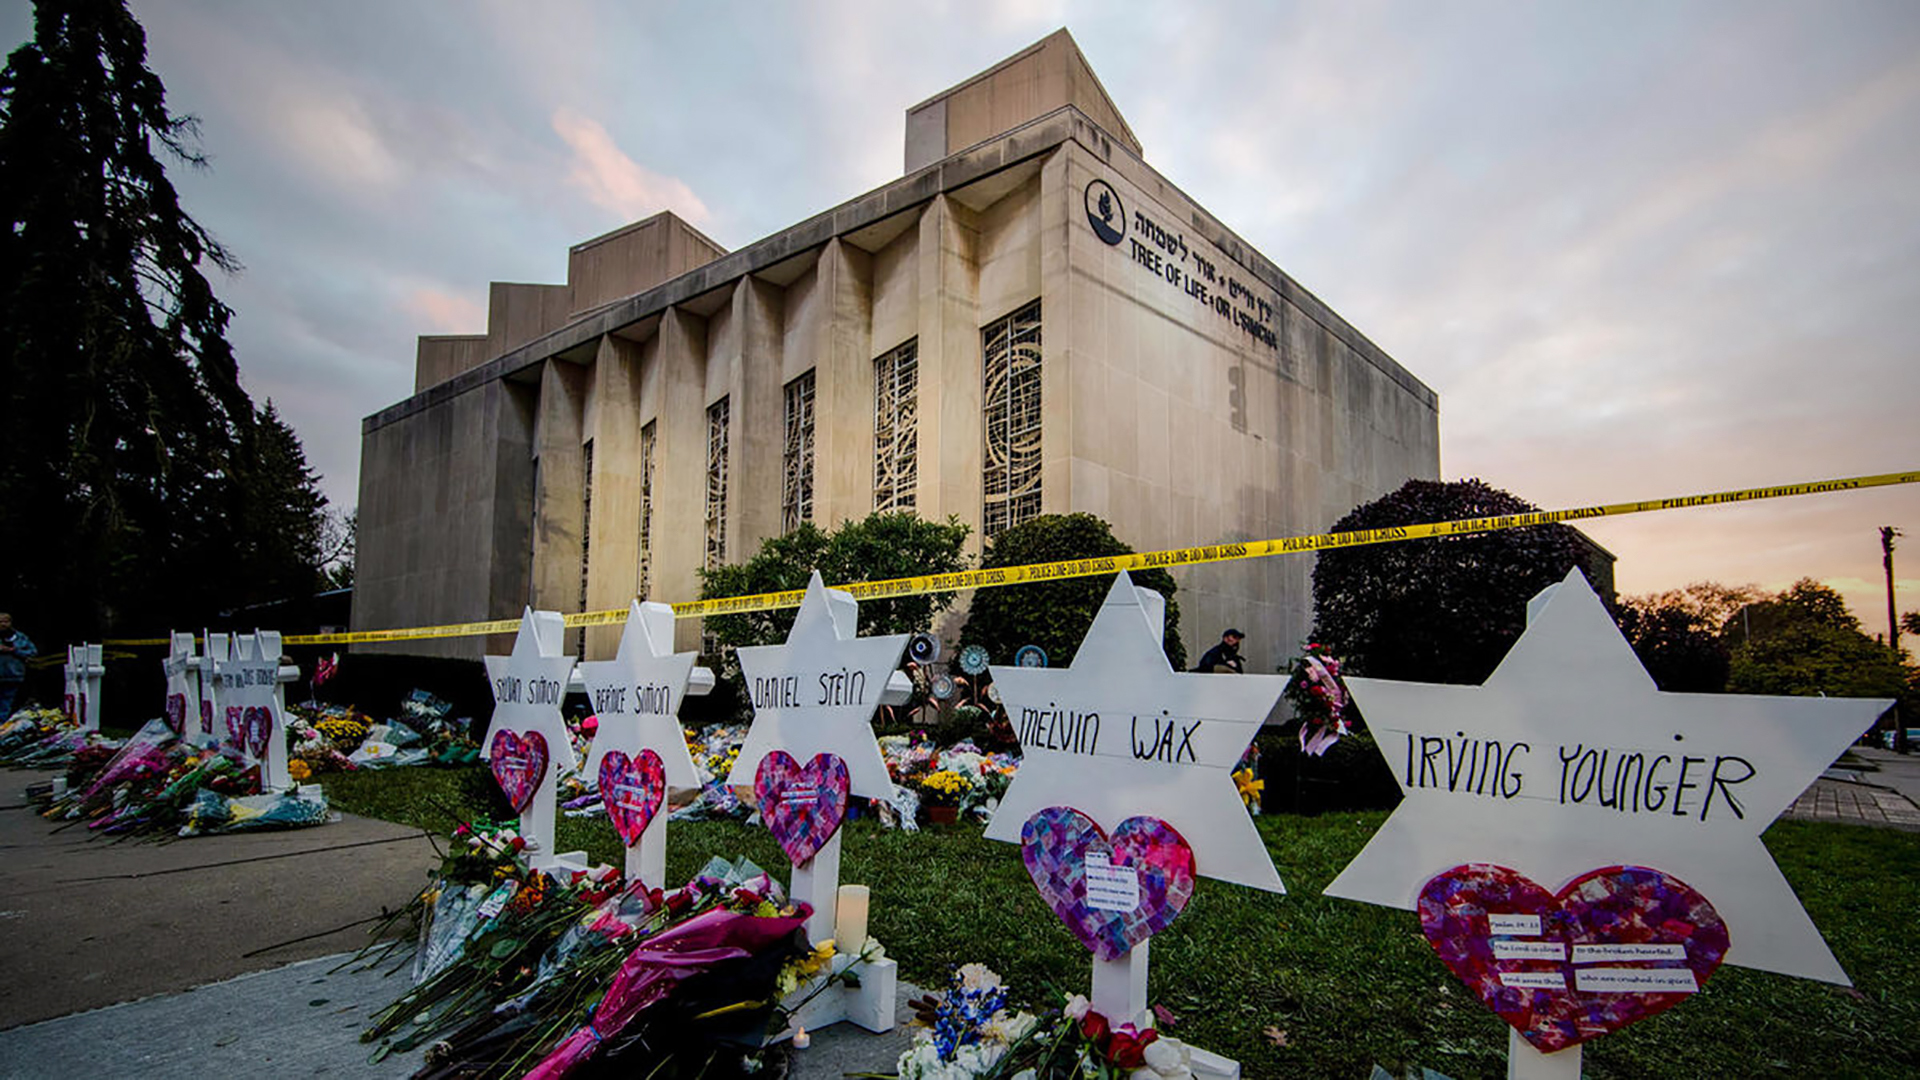 Memorials to the victims at the Tree of Life Synagogue in the days after the shooting.